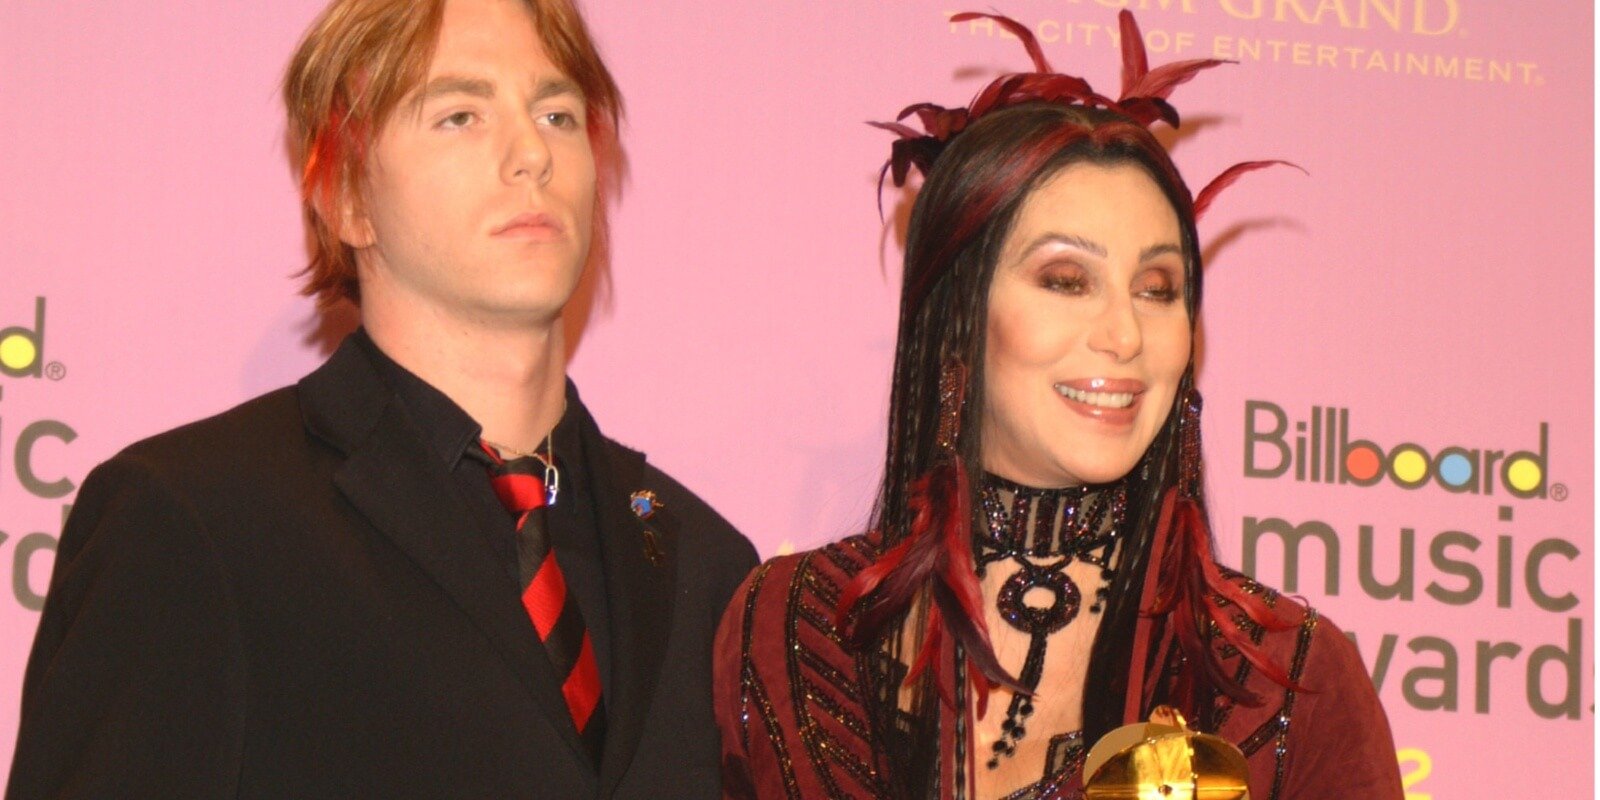 Cher and her son Elijah Blue Allman photographed at the Billboard Music Awards in 2002.